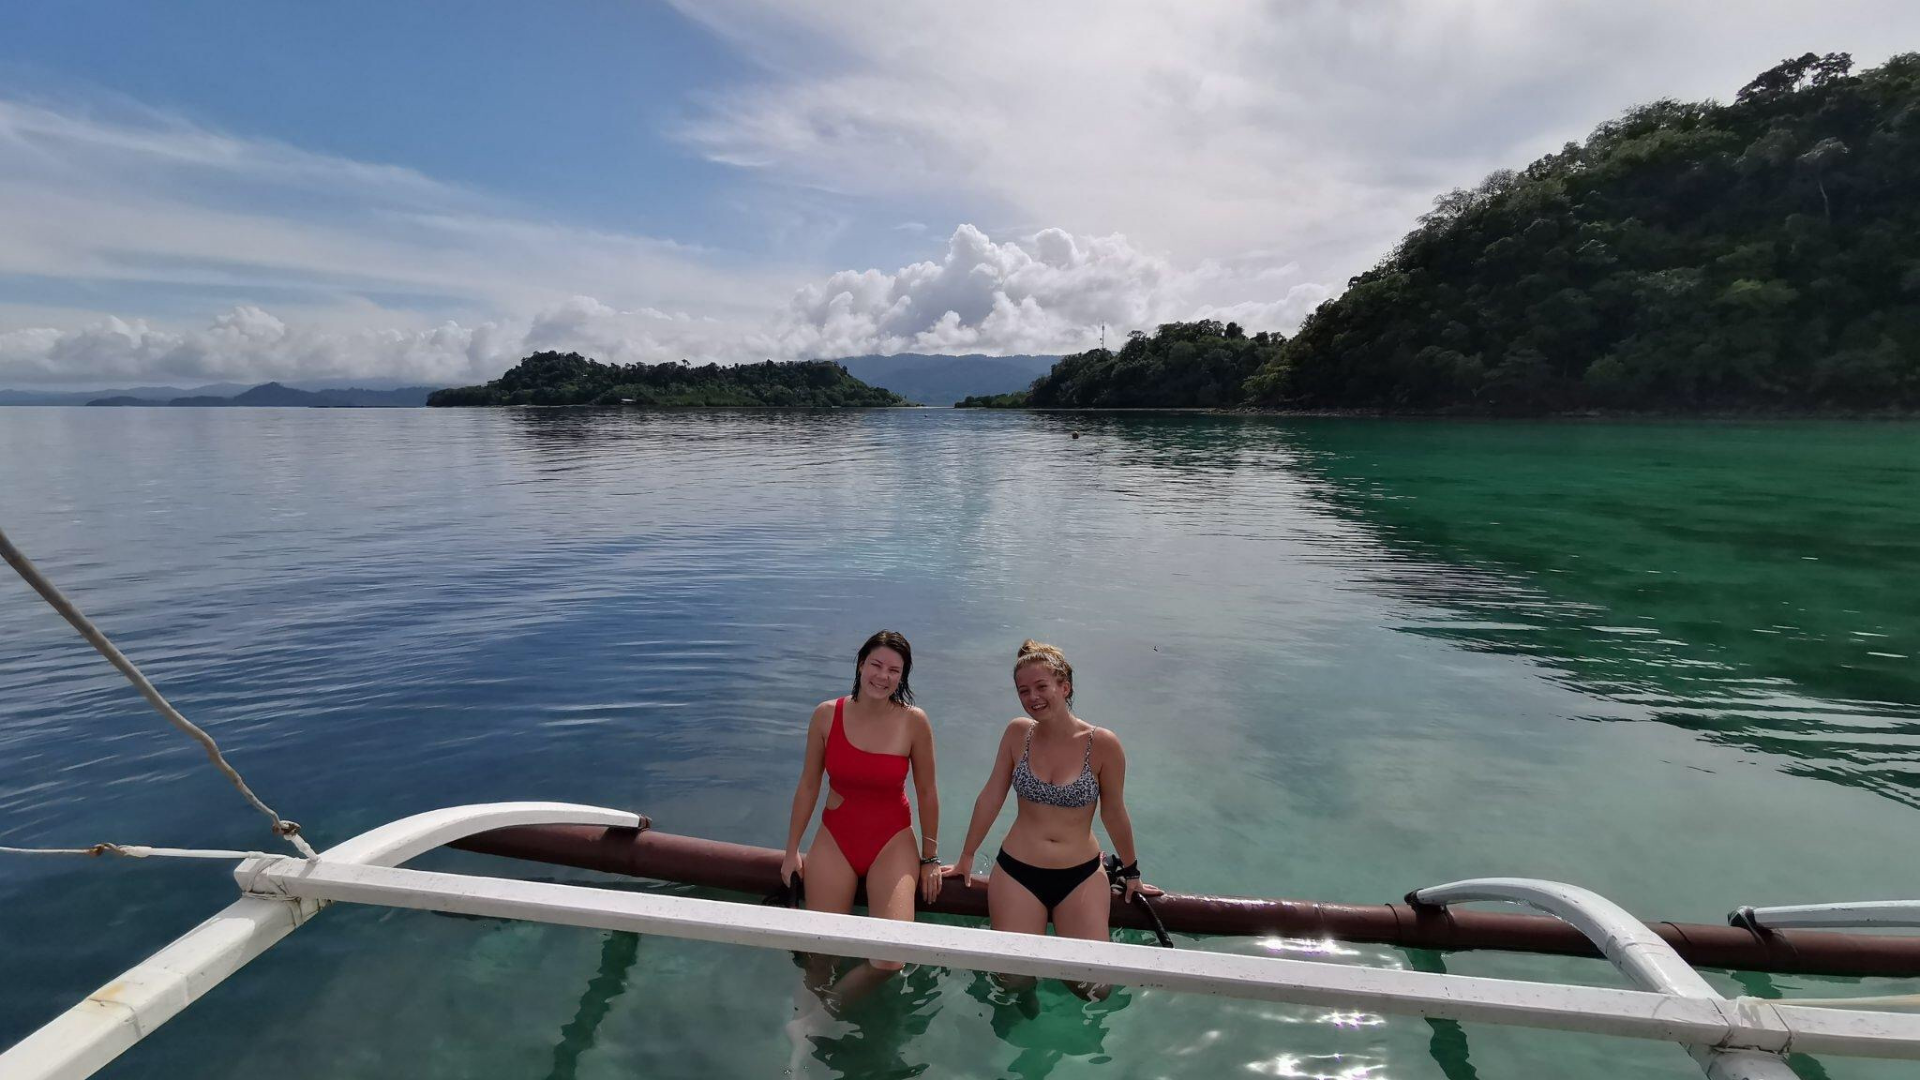 10-Day Philippines Tour from Manila to El Nido: Palawan and Port Barton